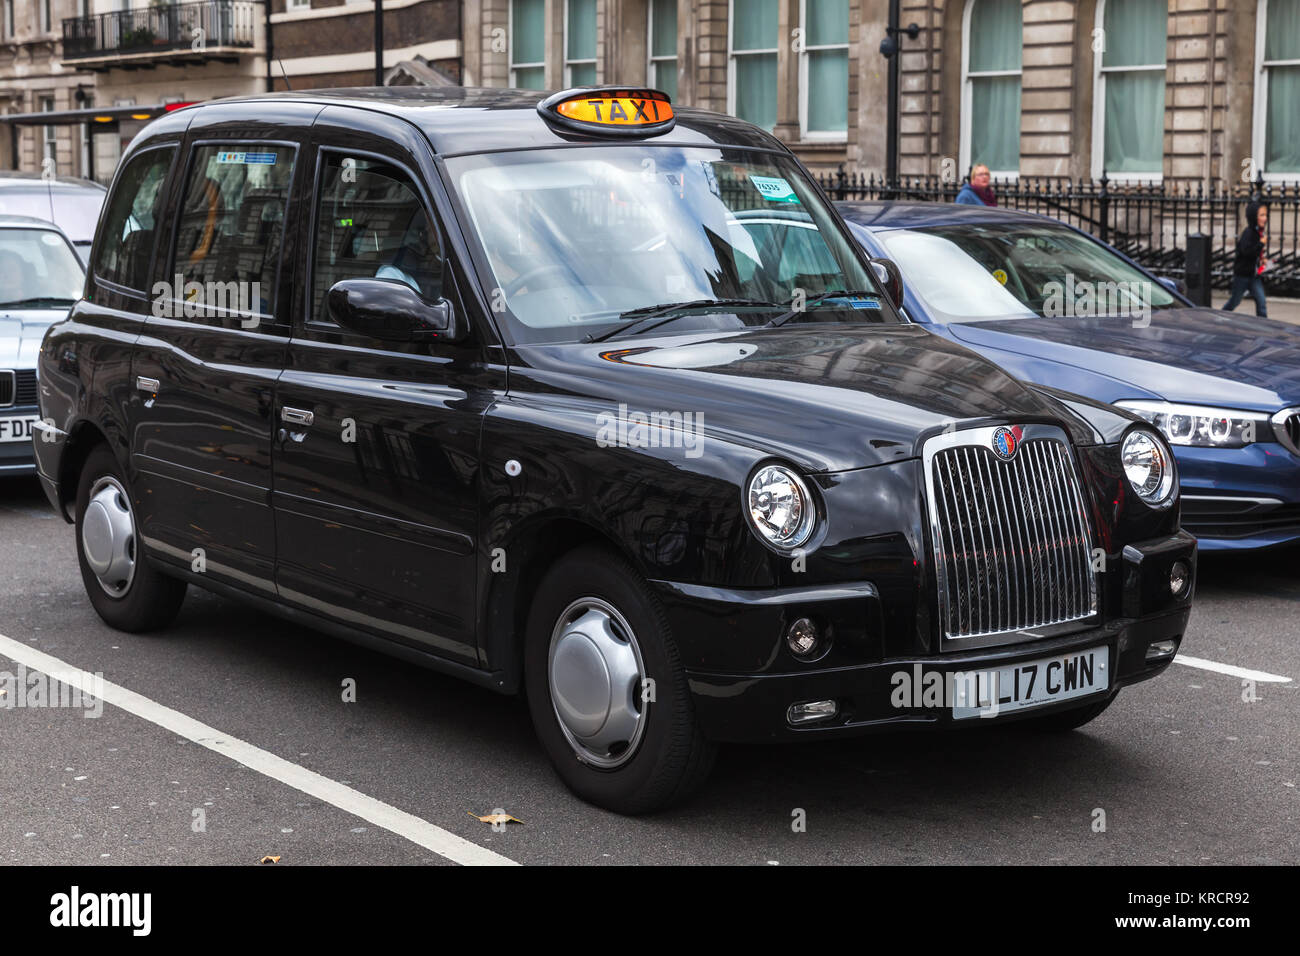 London, United Kingdom - October 29, 2017: Black taxi cab by The London Taxi Company is on the street Stock Photo